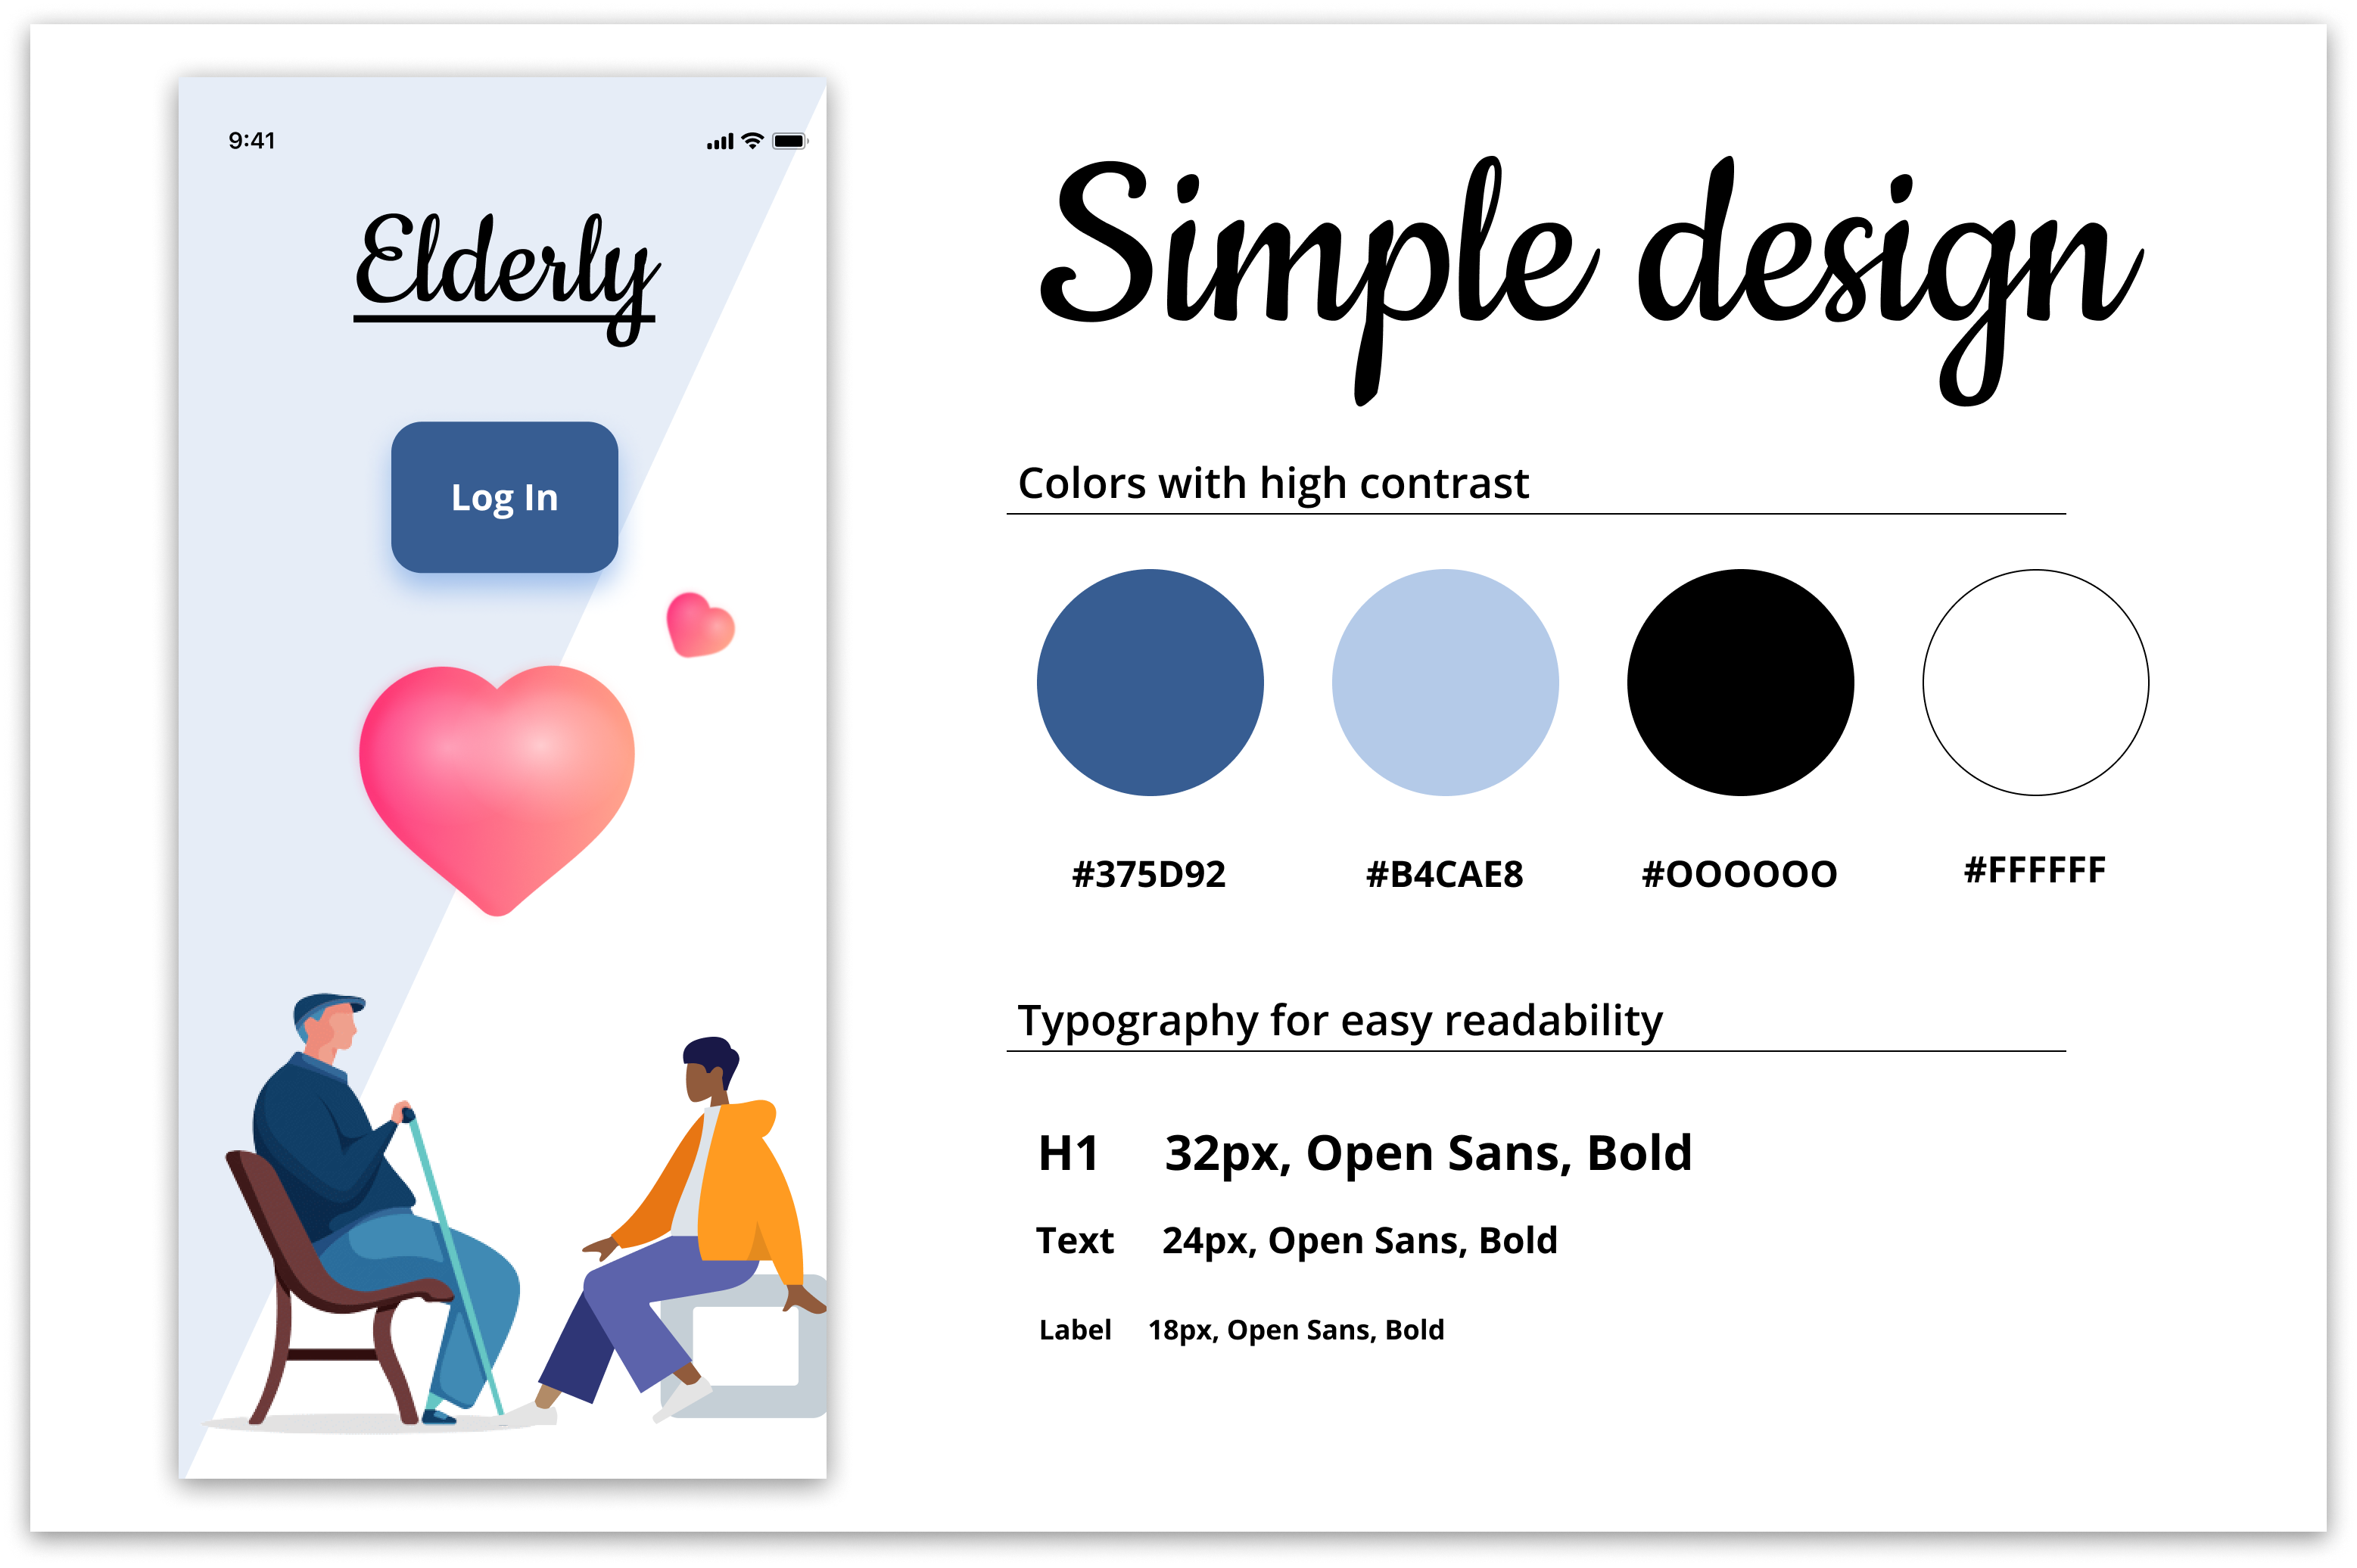 Explanation of simple design regarding color, typography and iconography with accessibility in mind